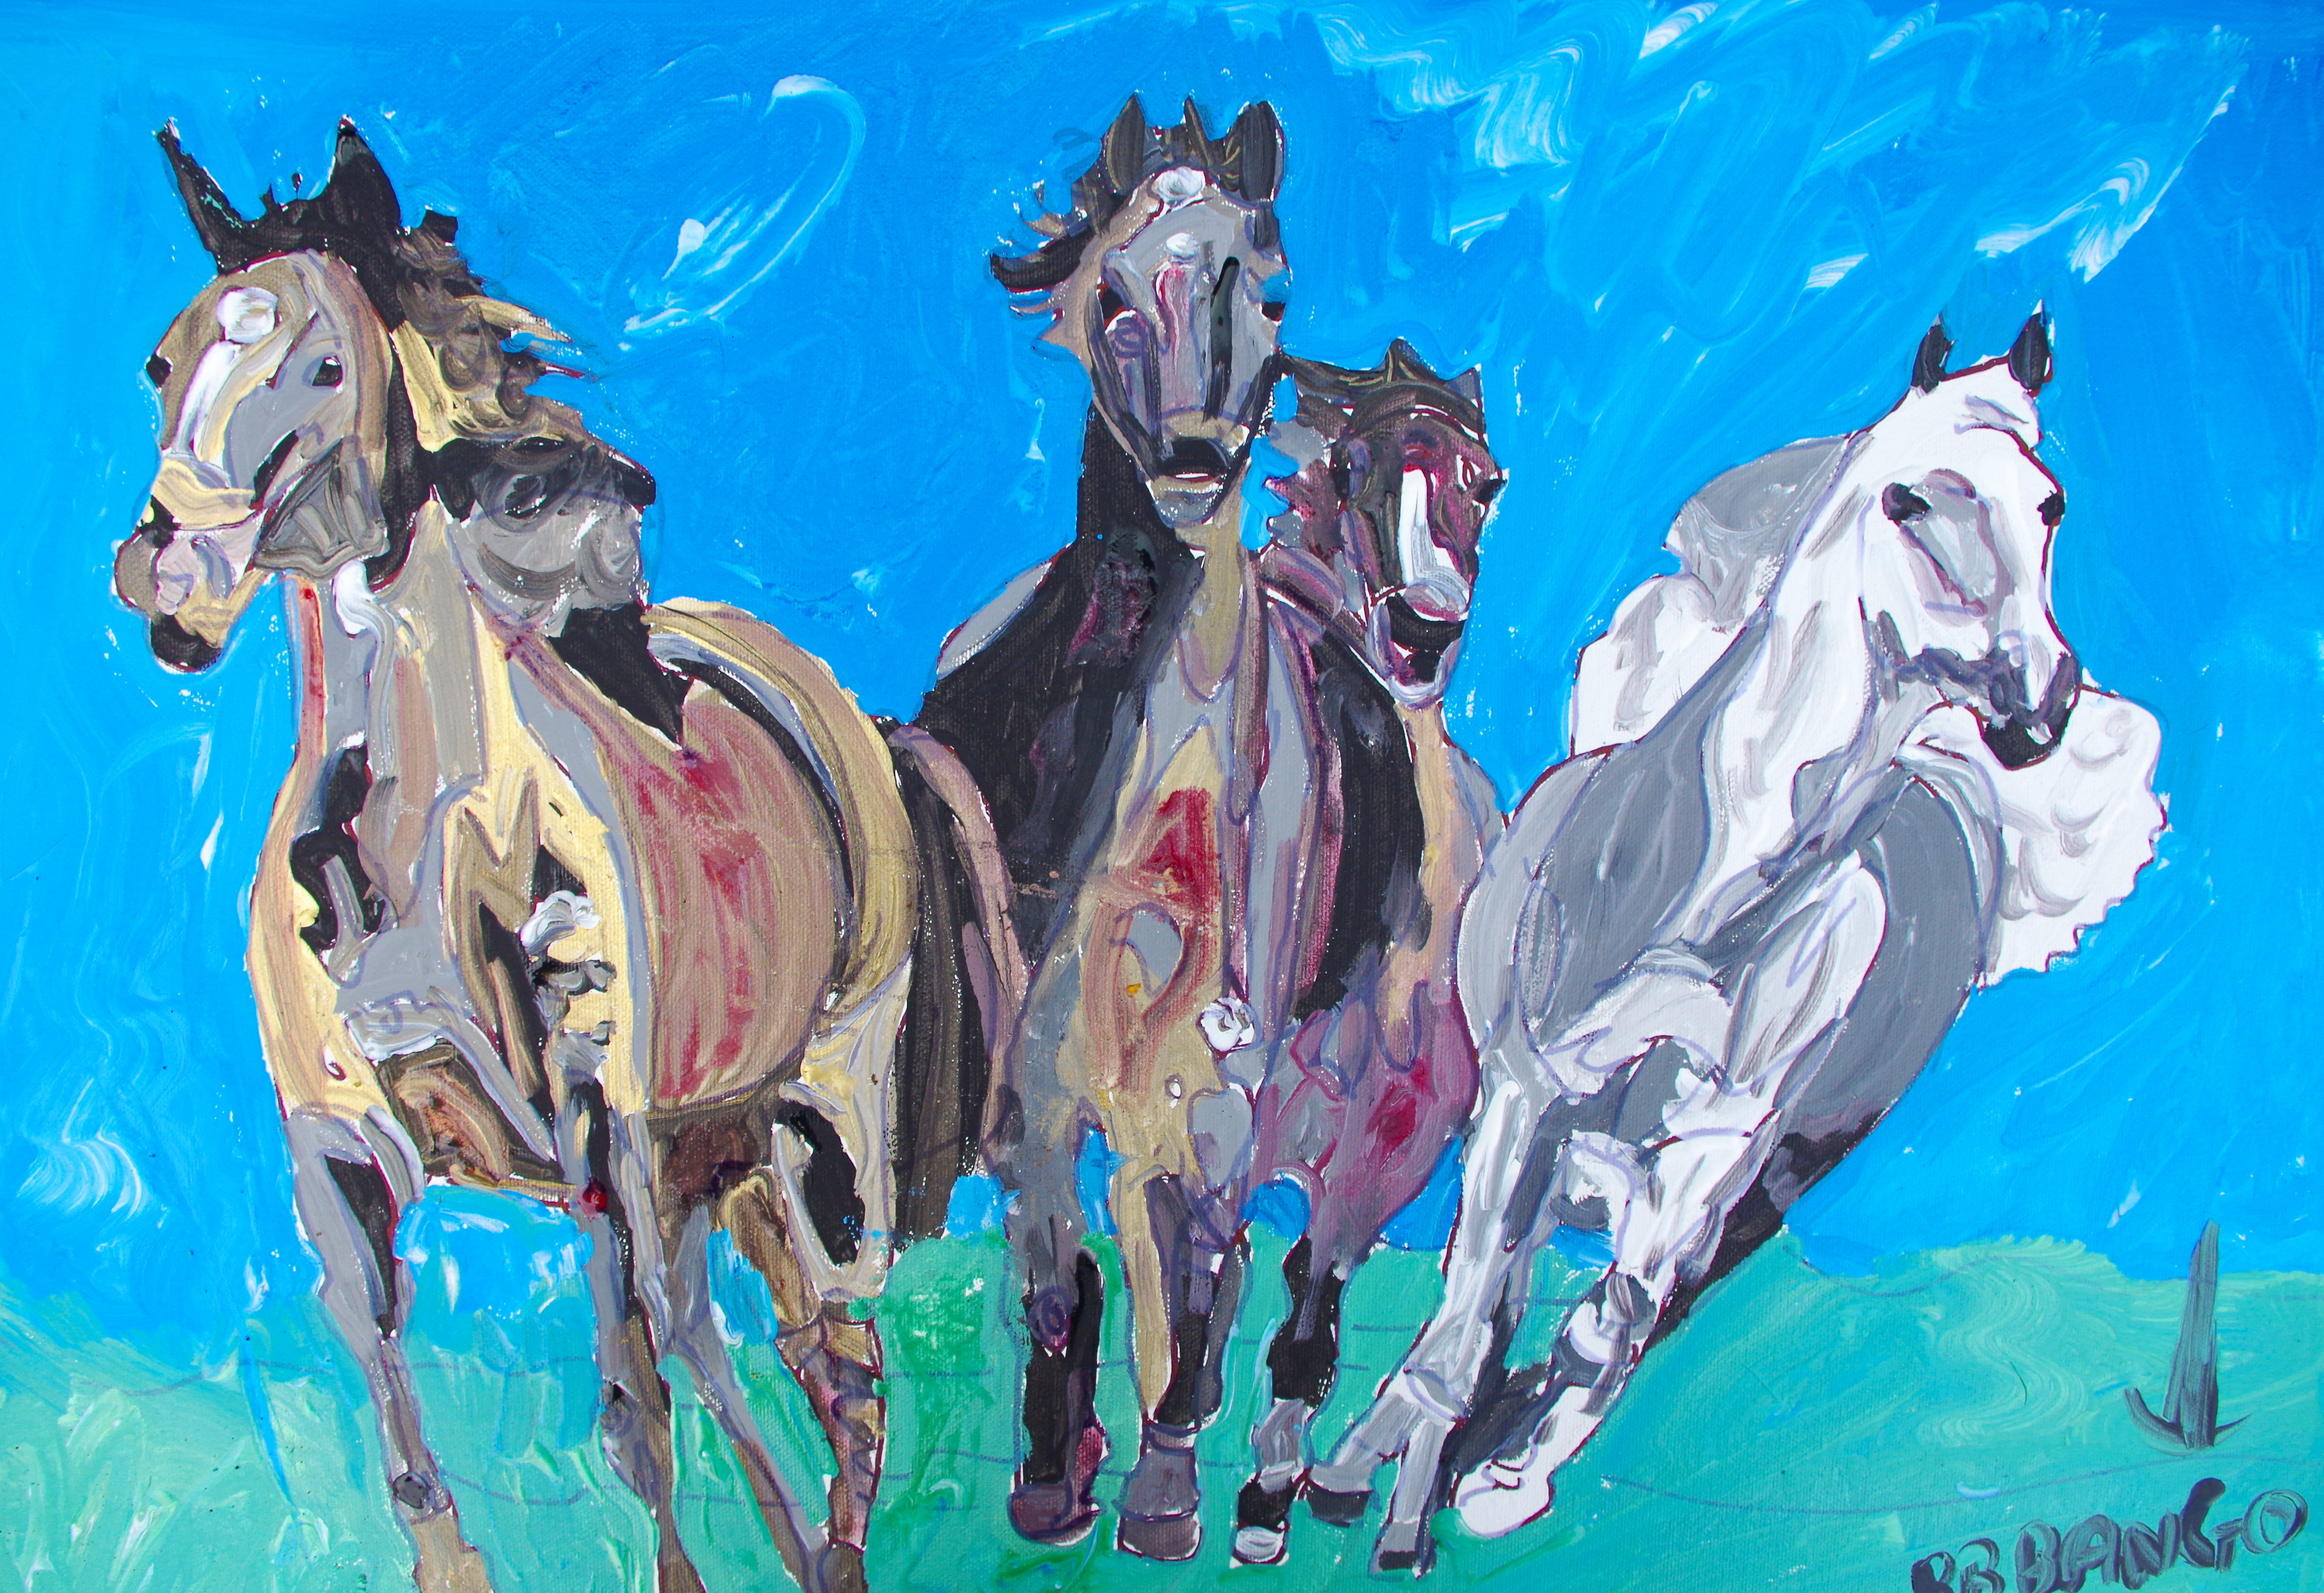 'Four wild horses' by BB Bango 24 by 18 inch acrylic on canvas. Sold to art collector in UK